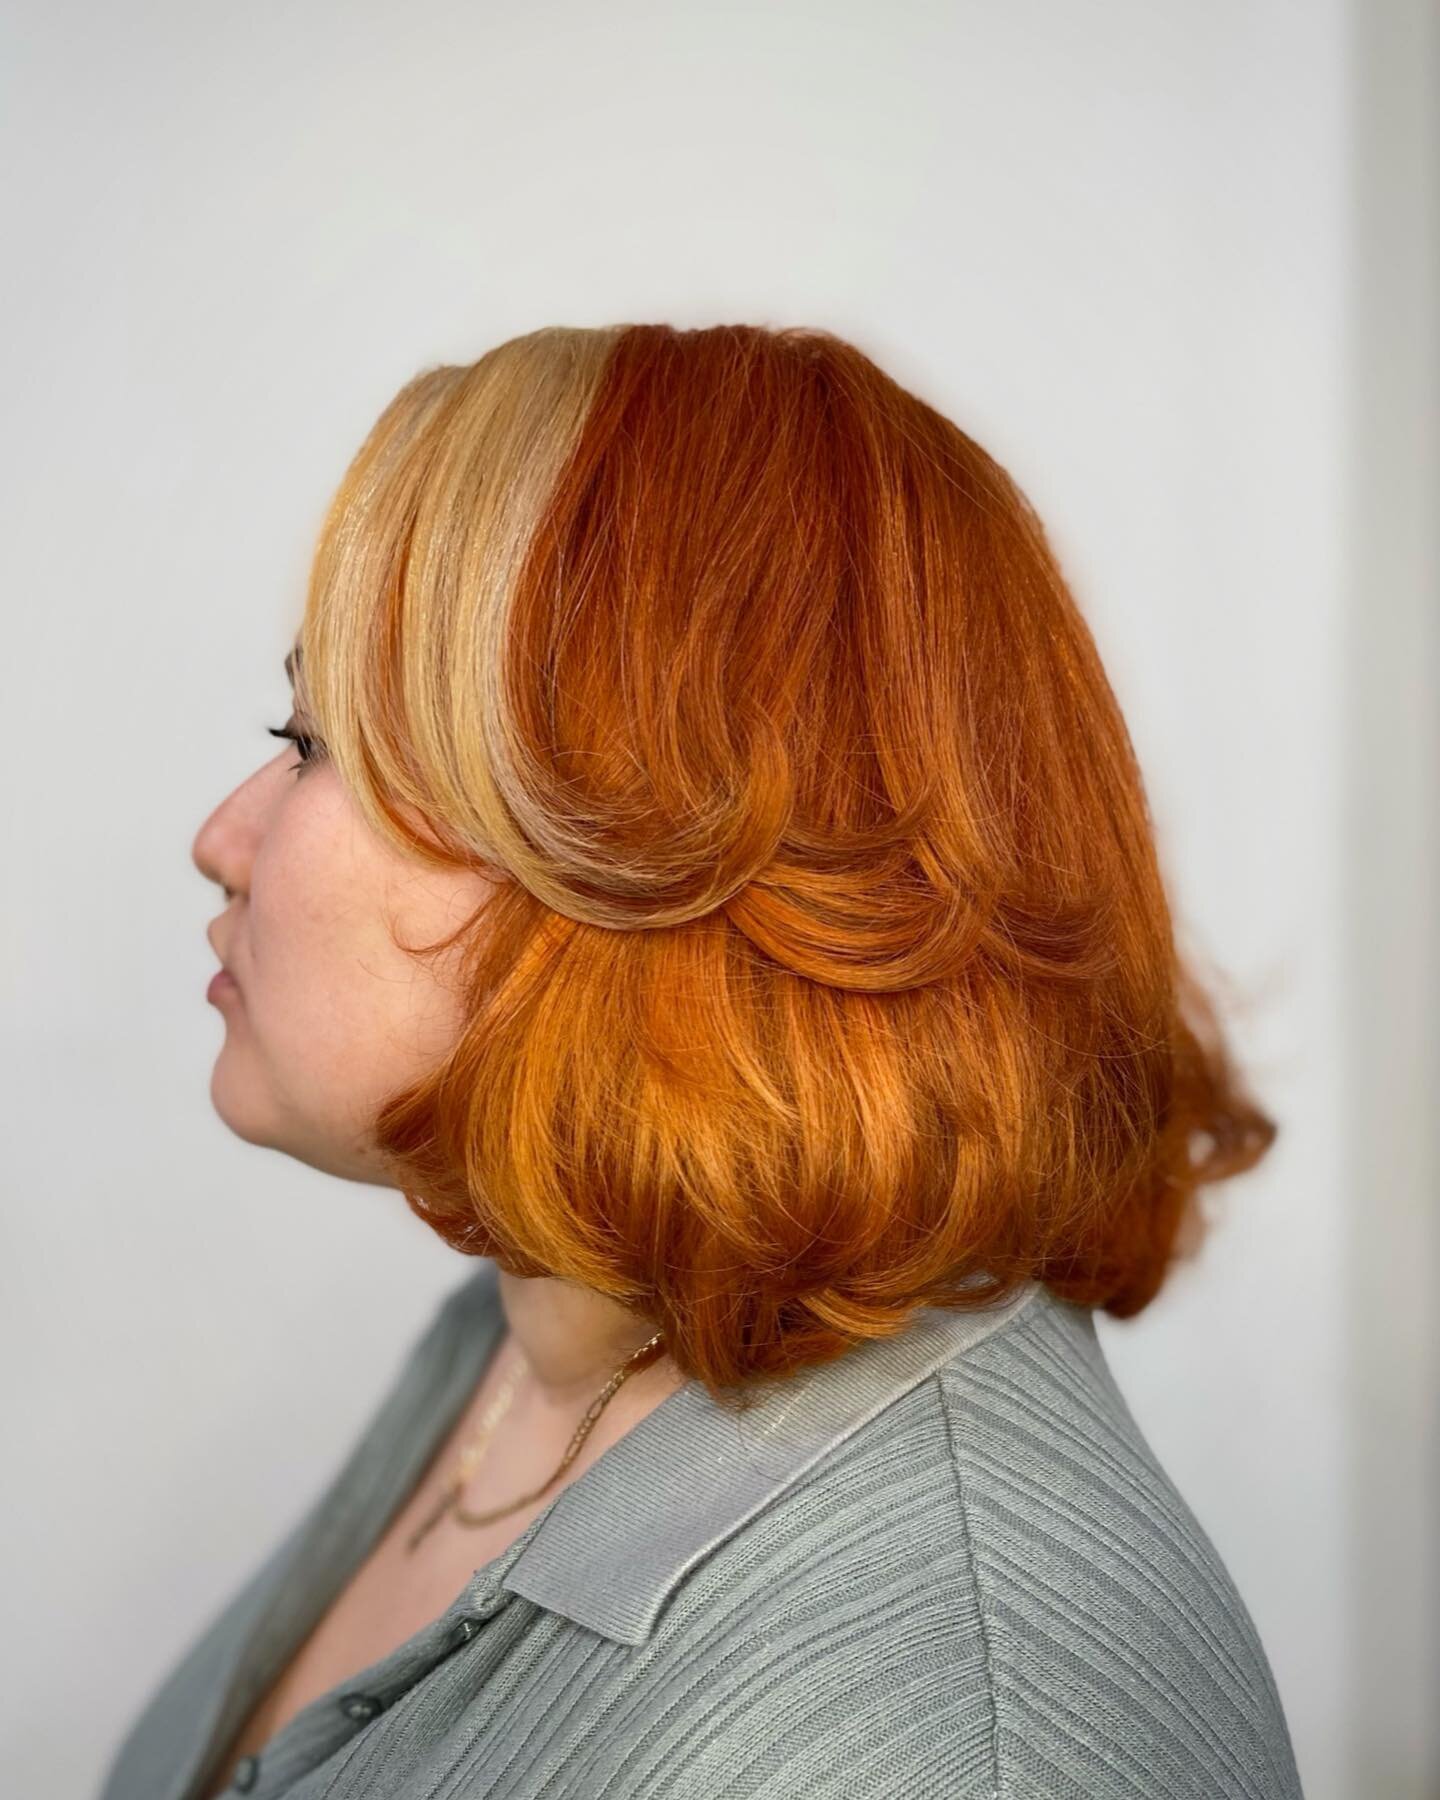 &lsquo;tis the season🍂🧡🎃
&bull;
Full color transformation beautifully formulated by our girl Kierra!
&bull;
&bull;
&bull;
#hudsonvalleyny #hudsonvalleyroots #HVR #newyorksalon #hairstyles #hudsonvalleysalon #welovehair #behindthechair #cutandcolor